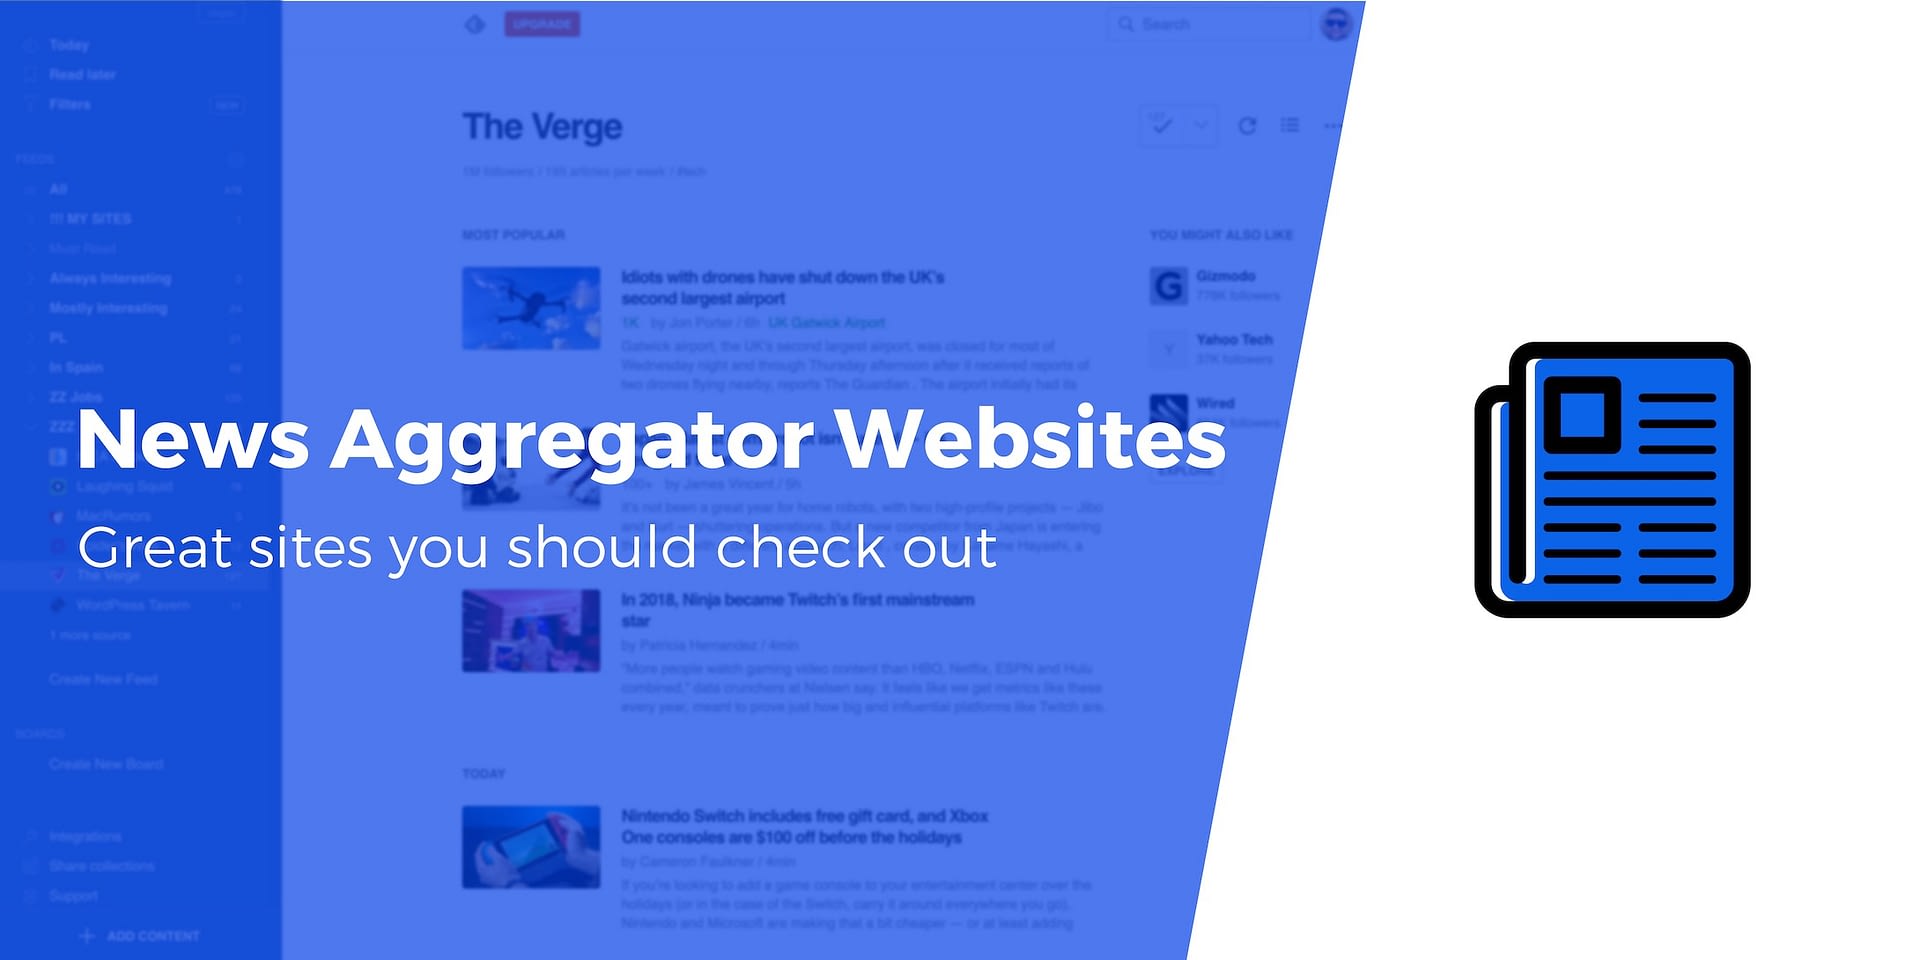 7 Great News Aggregator Websites You Should Check Out Plus - 